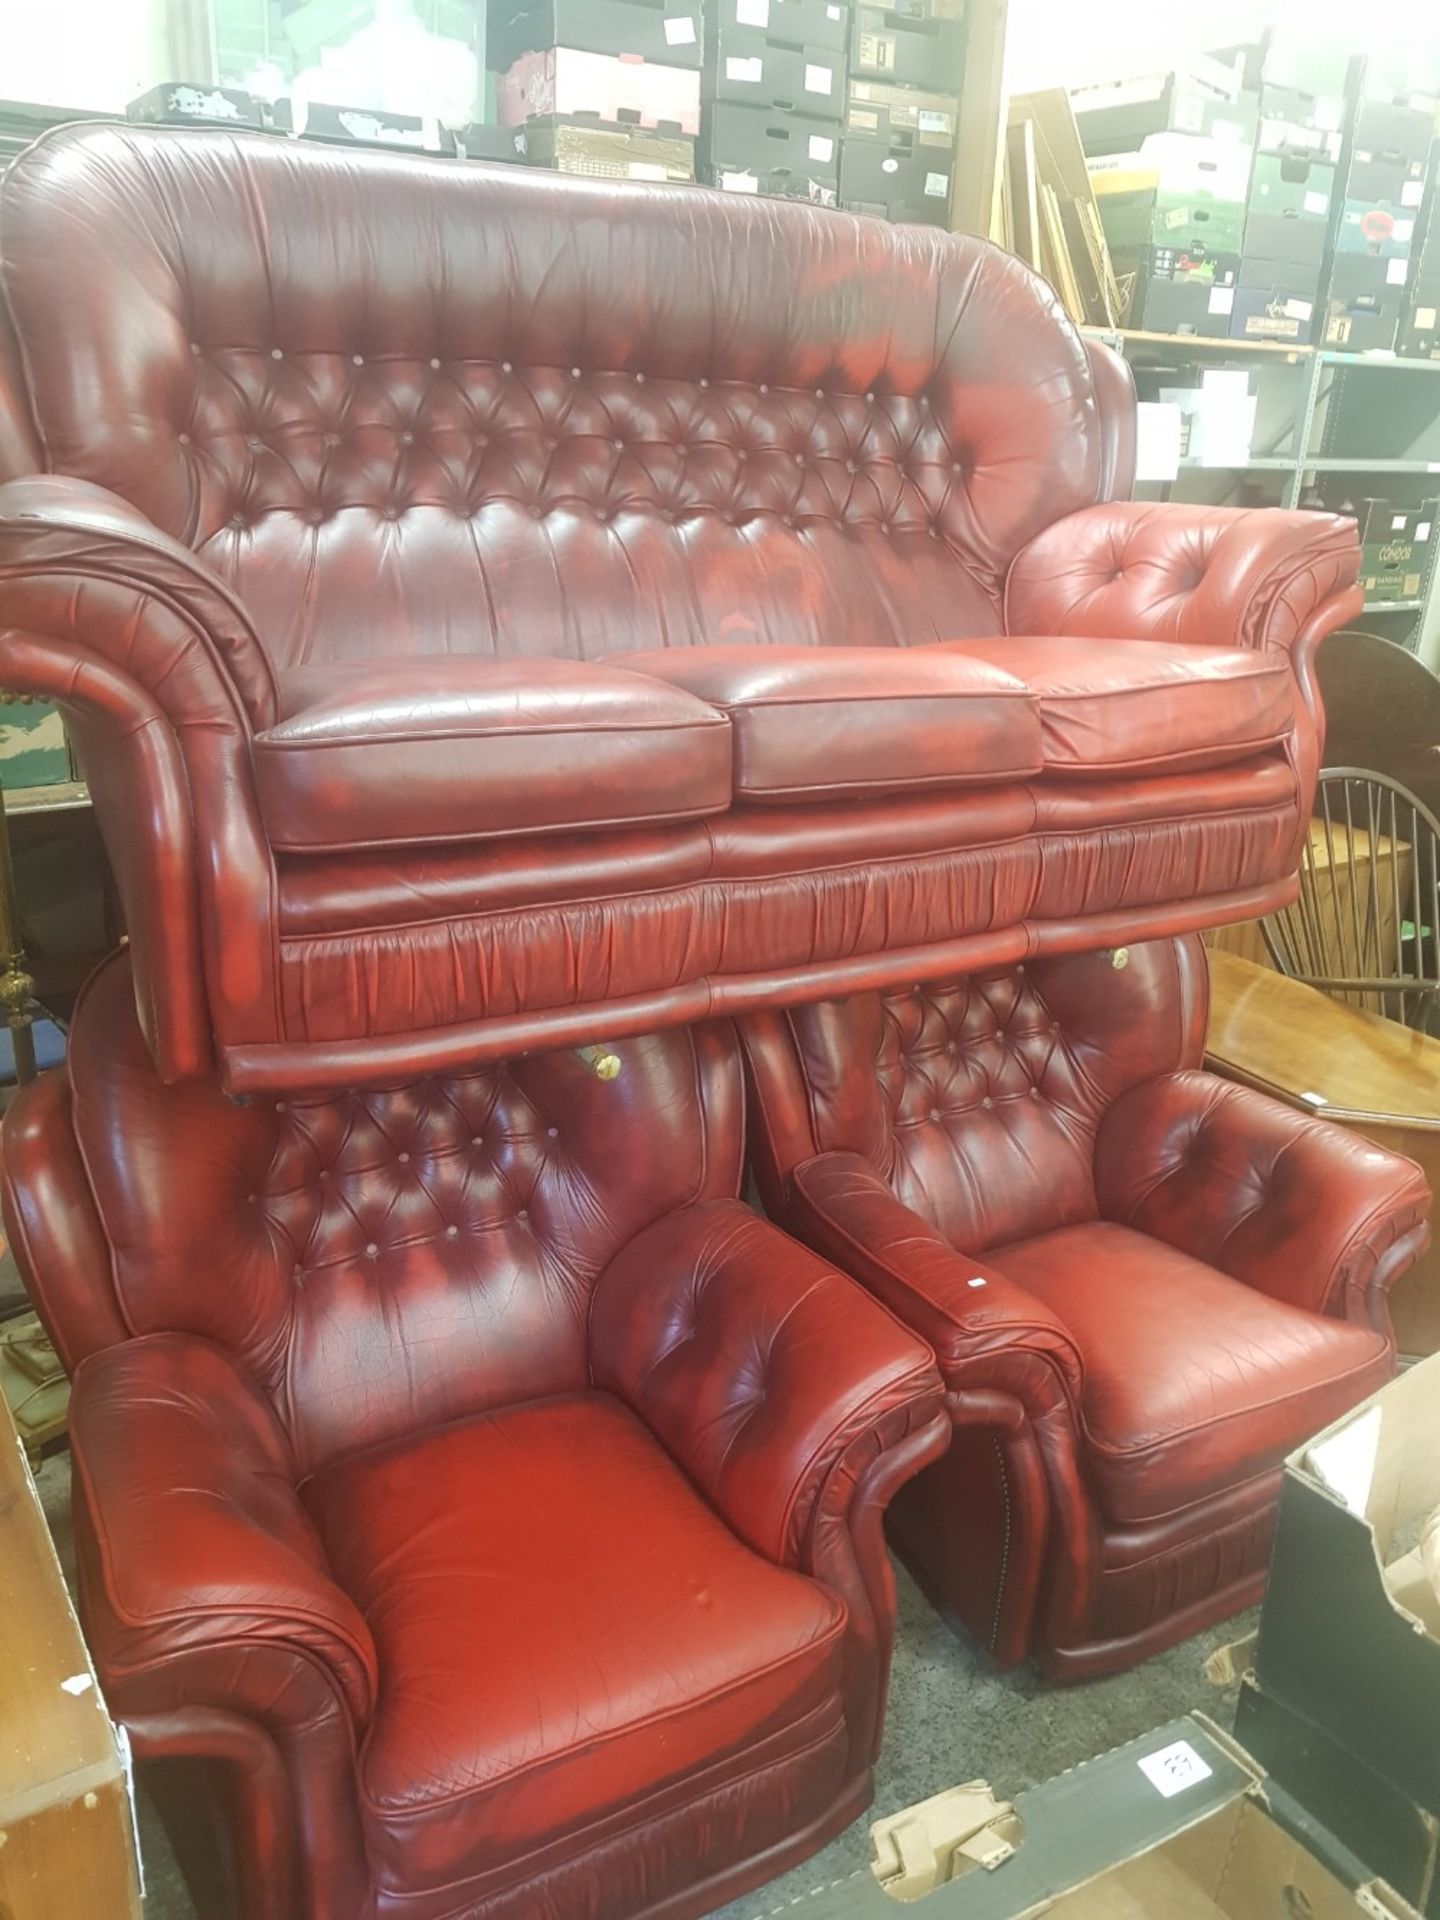 Oxblood leather Chesterfield high back 3 seater sofa and 2 matching armchairs.